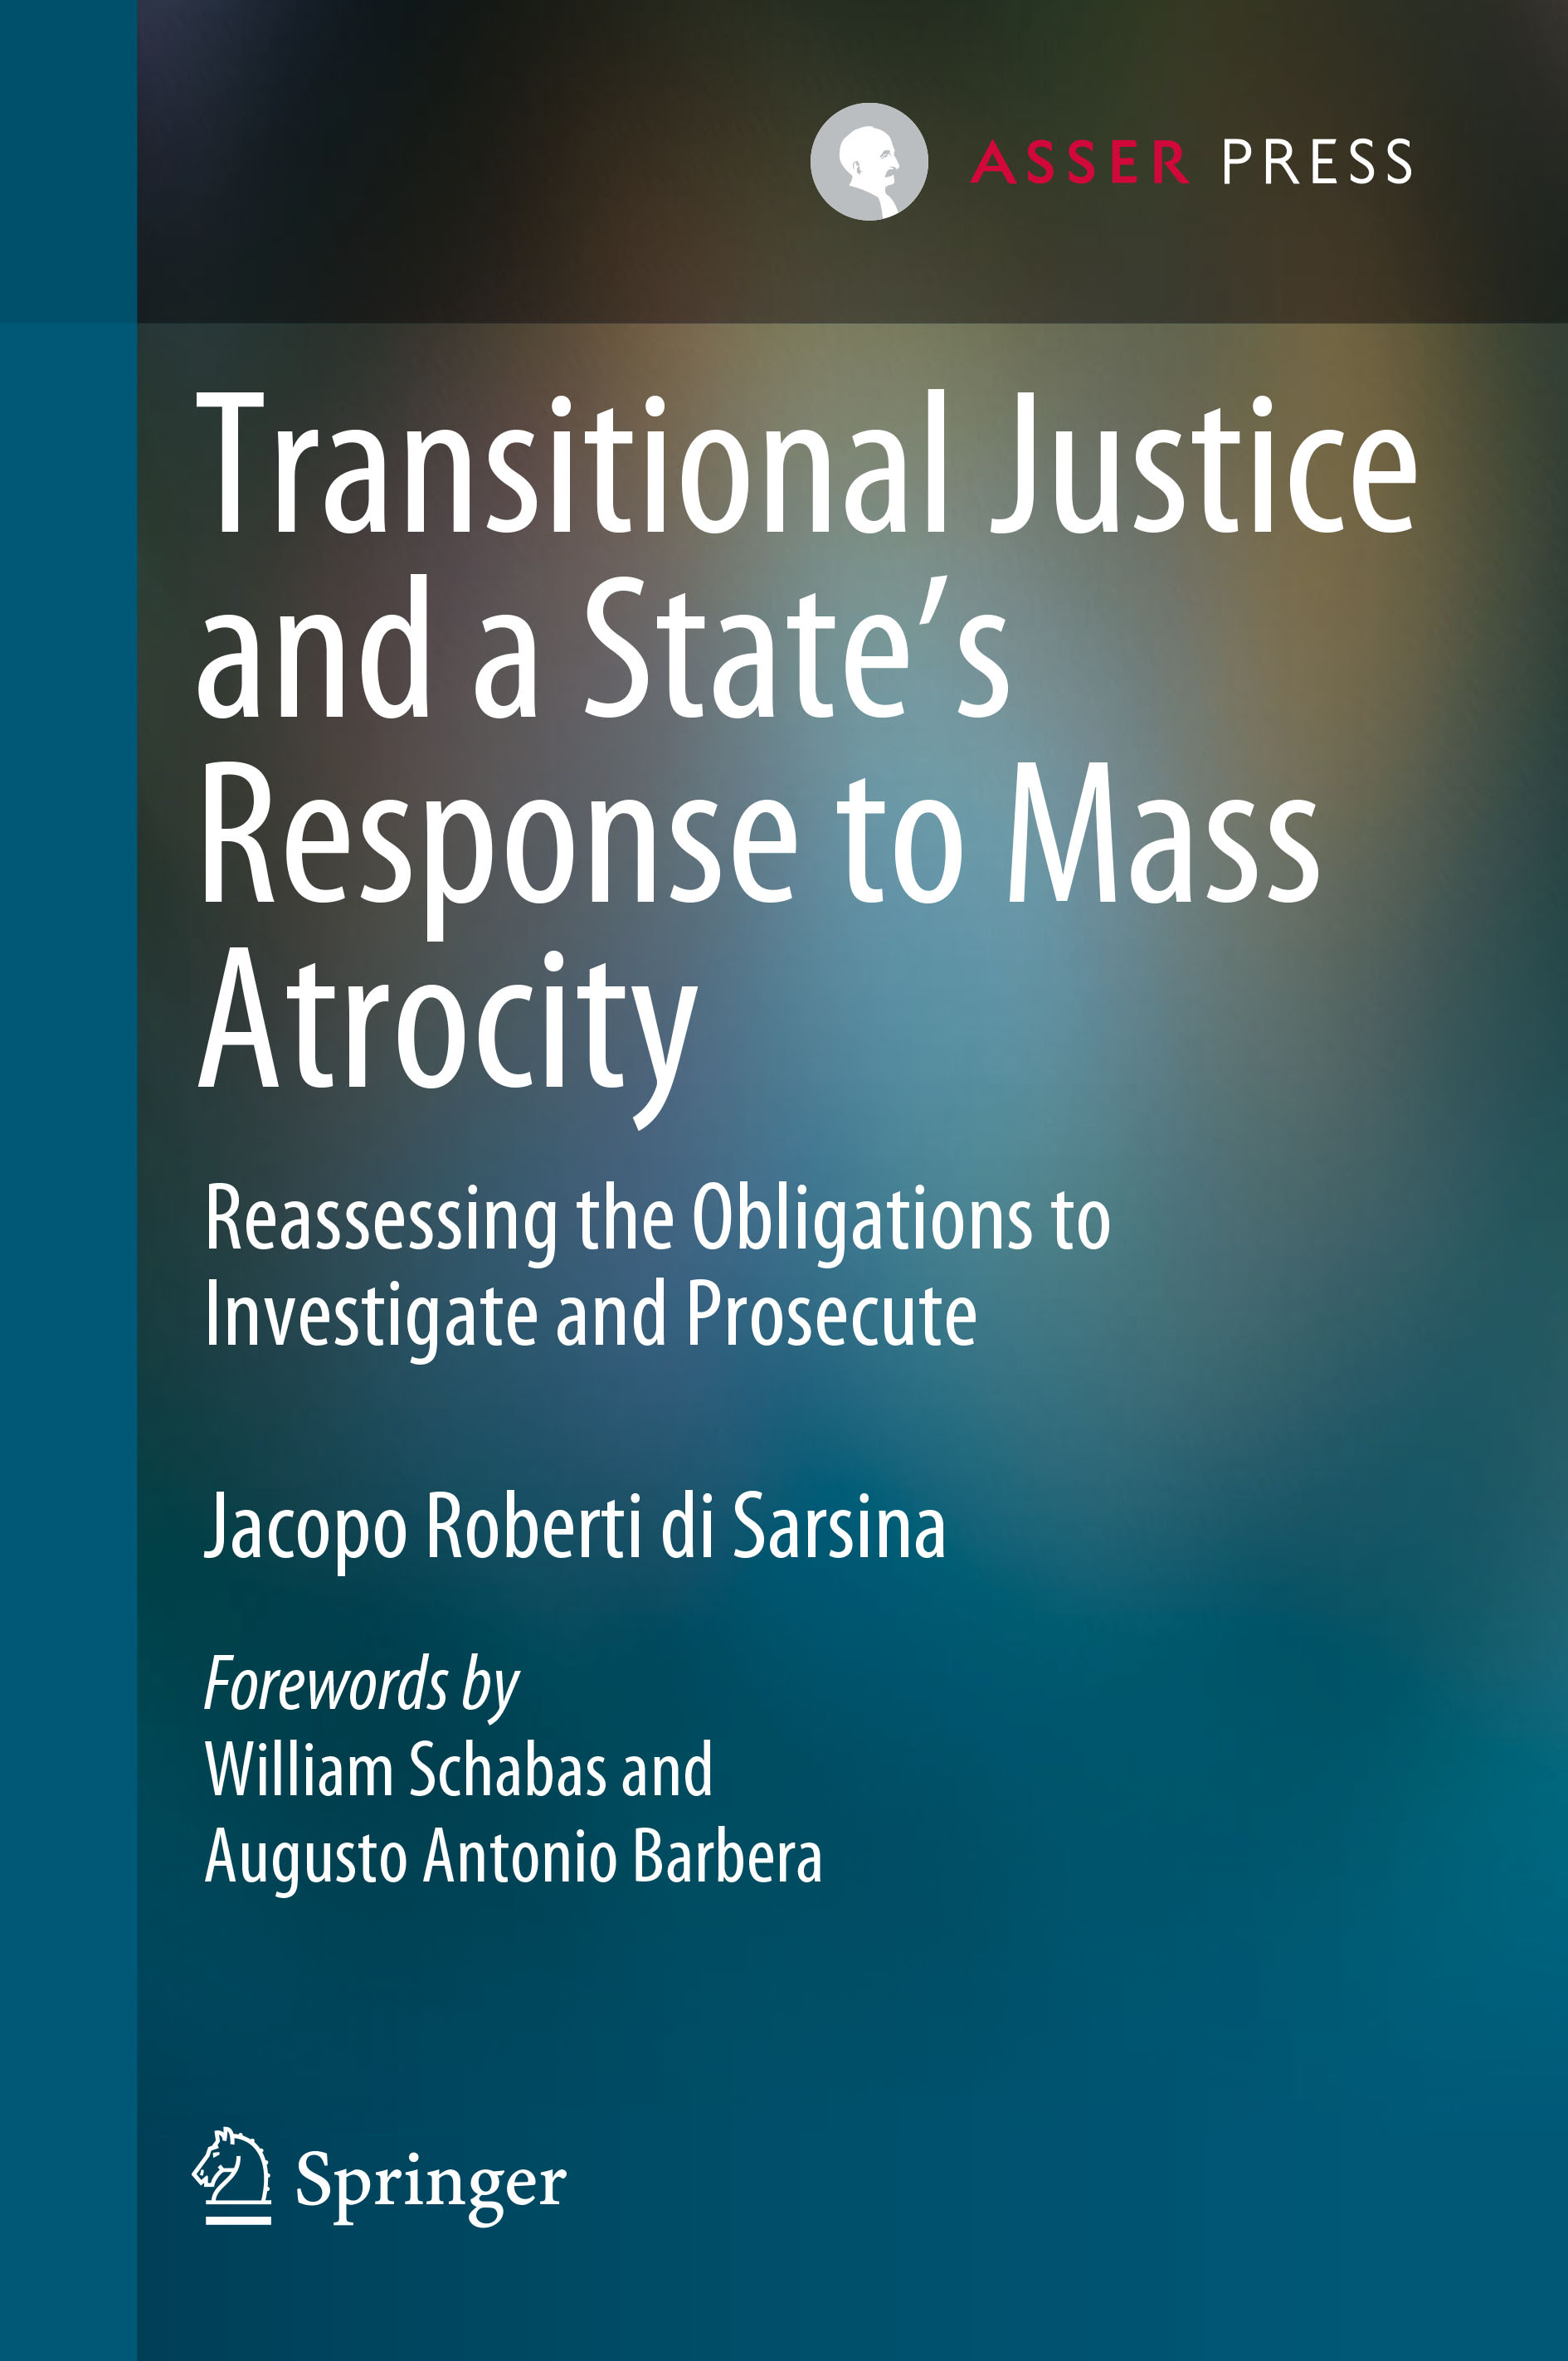 Transitional Justice and a State’s Response to Mass Atrocity - Reassessing the Obligations to Investigate and Prosecute